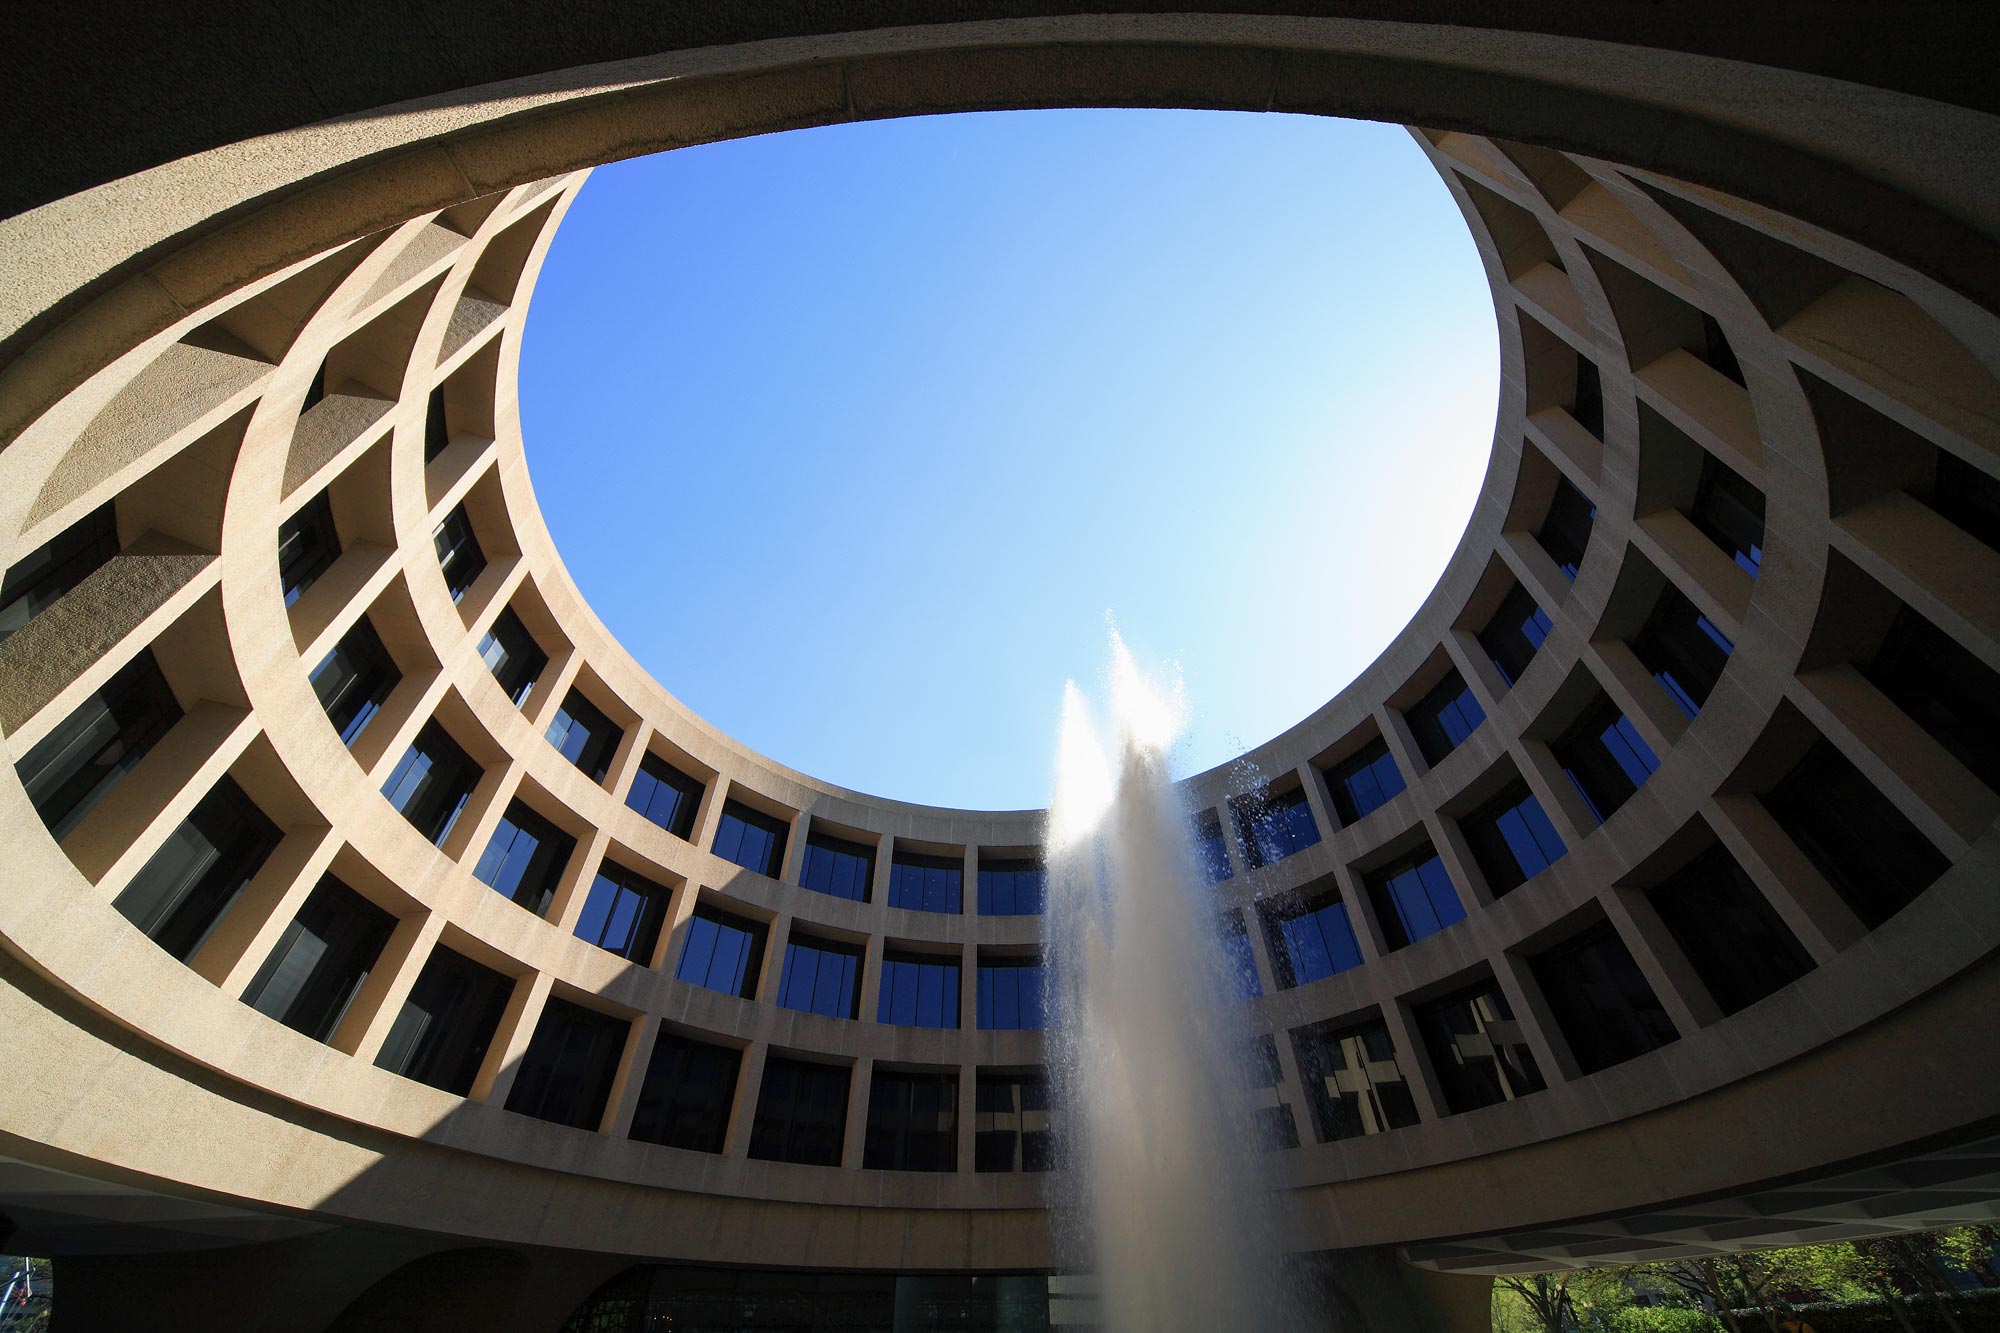 Looking up to the sky from inside of a circle building with a fountain in the middle and the sides of the building visible